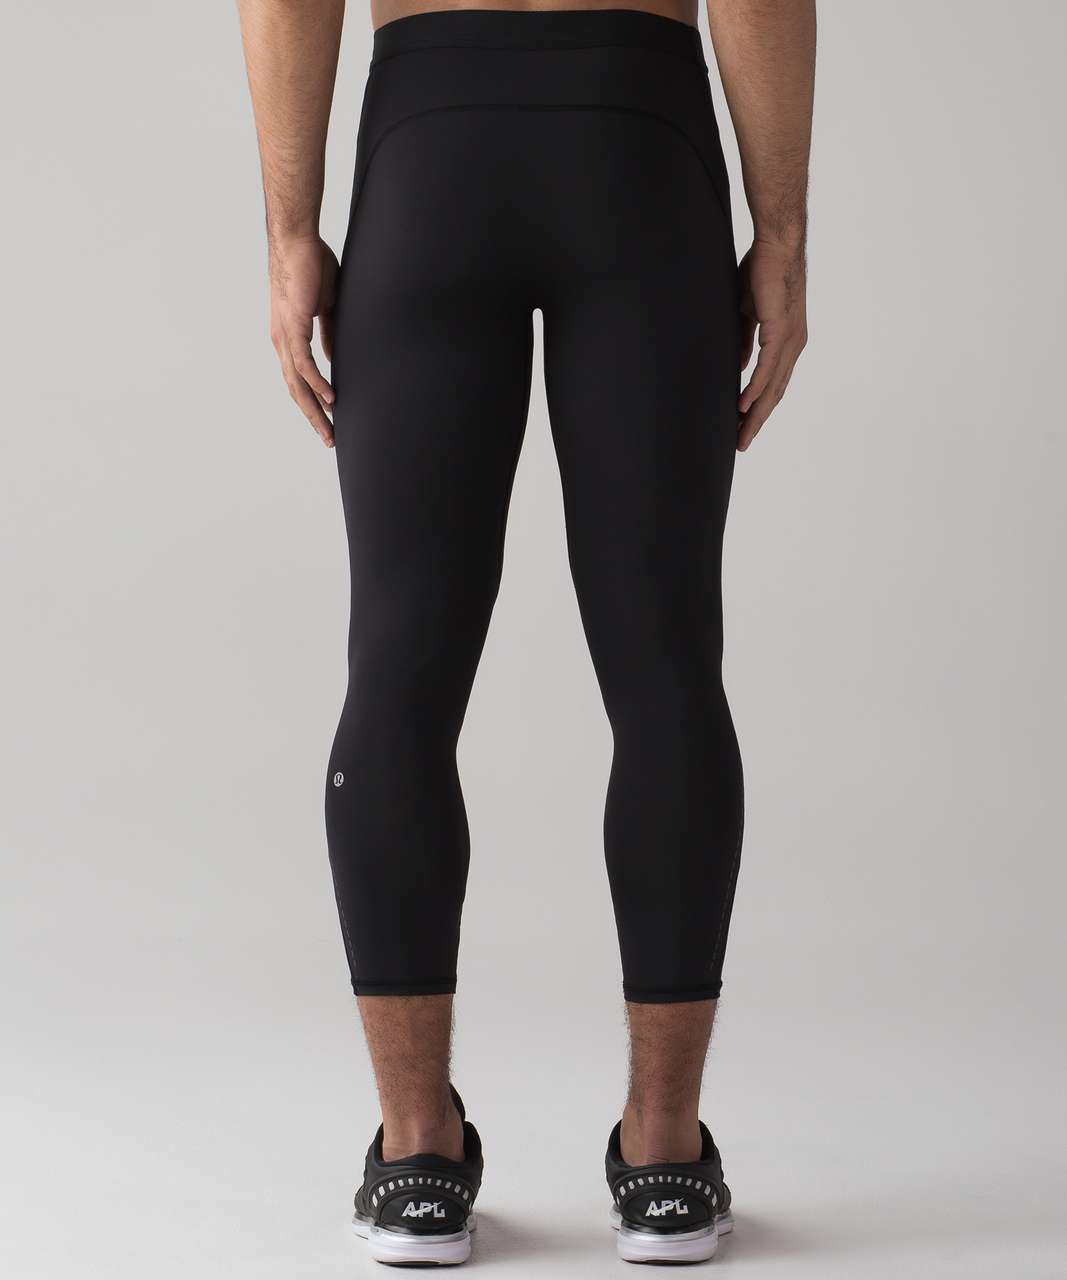 Lululemon x Barry's Men's Sure Tights Compression Active Run Size S